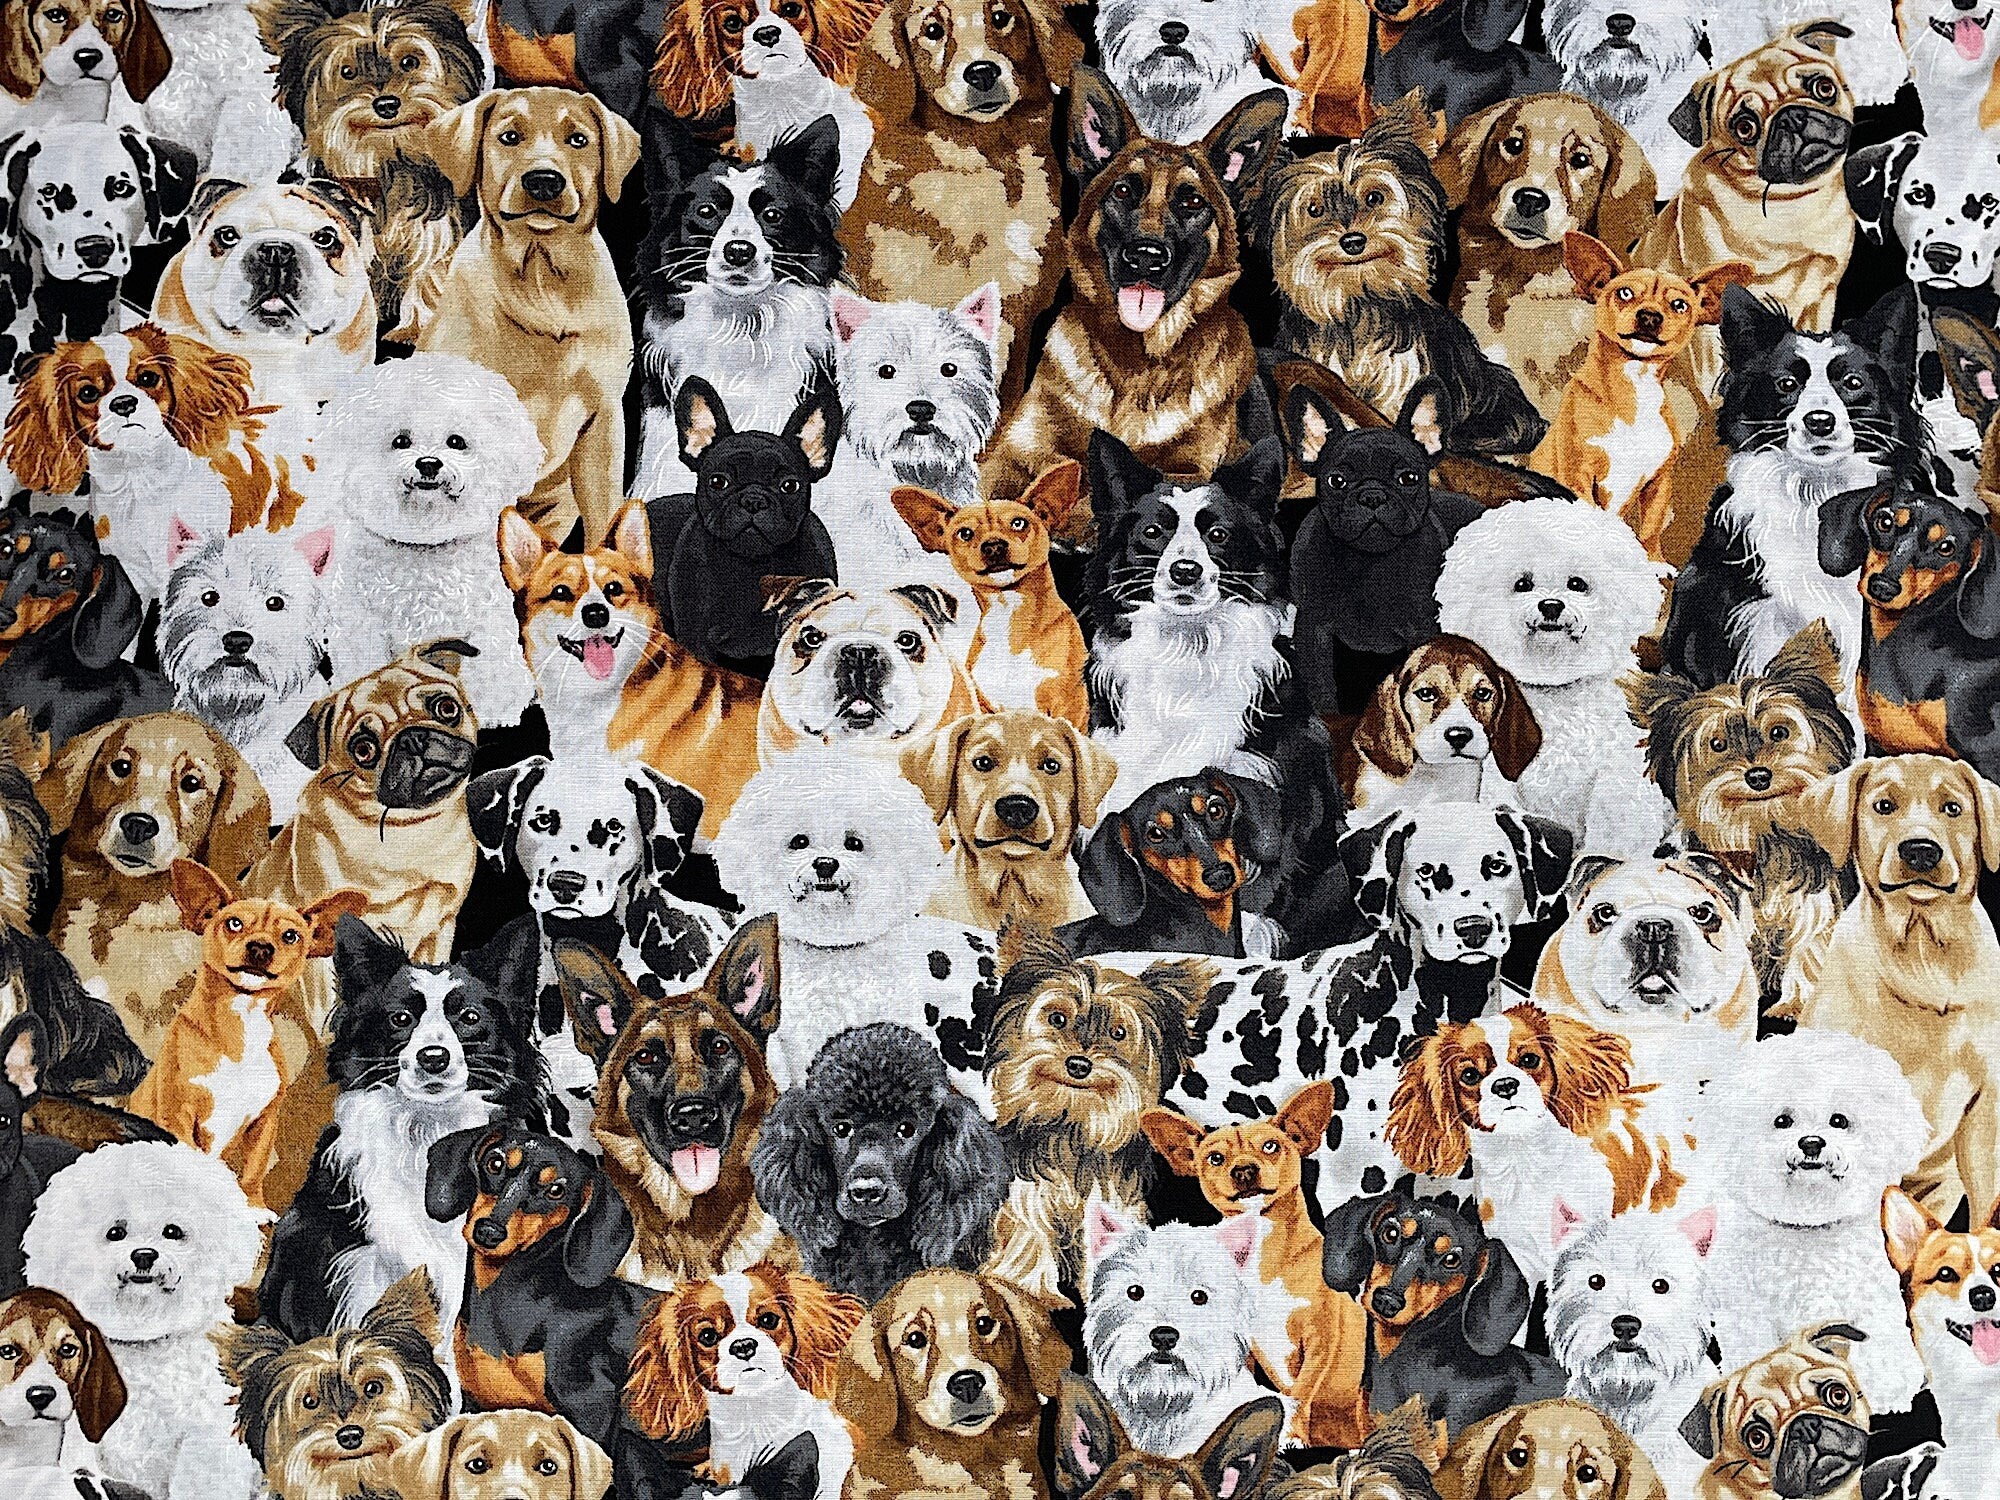 Cotton fabric covered with several breeds of dogs such as labs, collies, pugs and more.